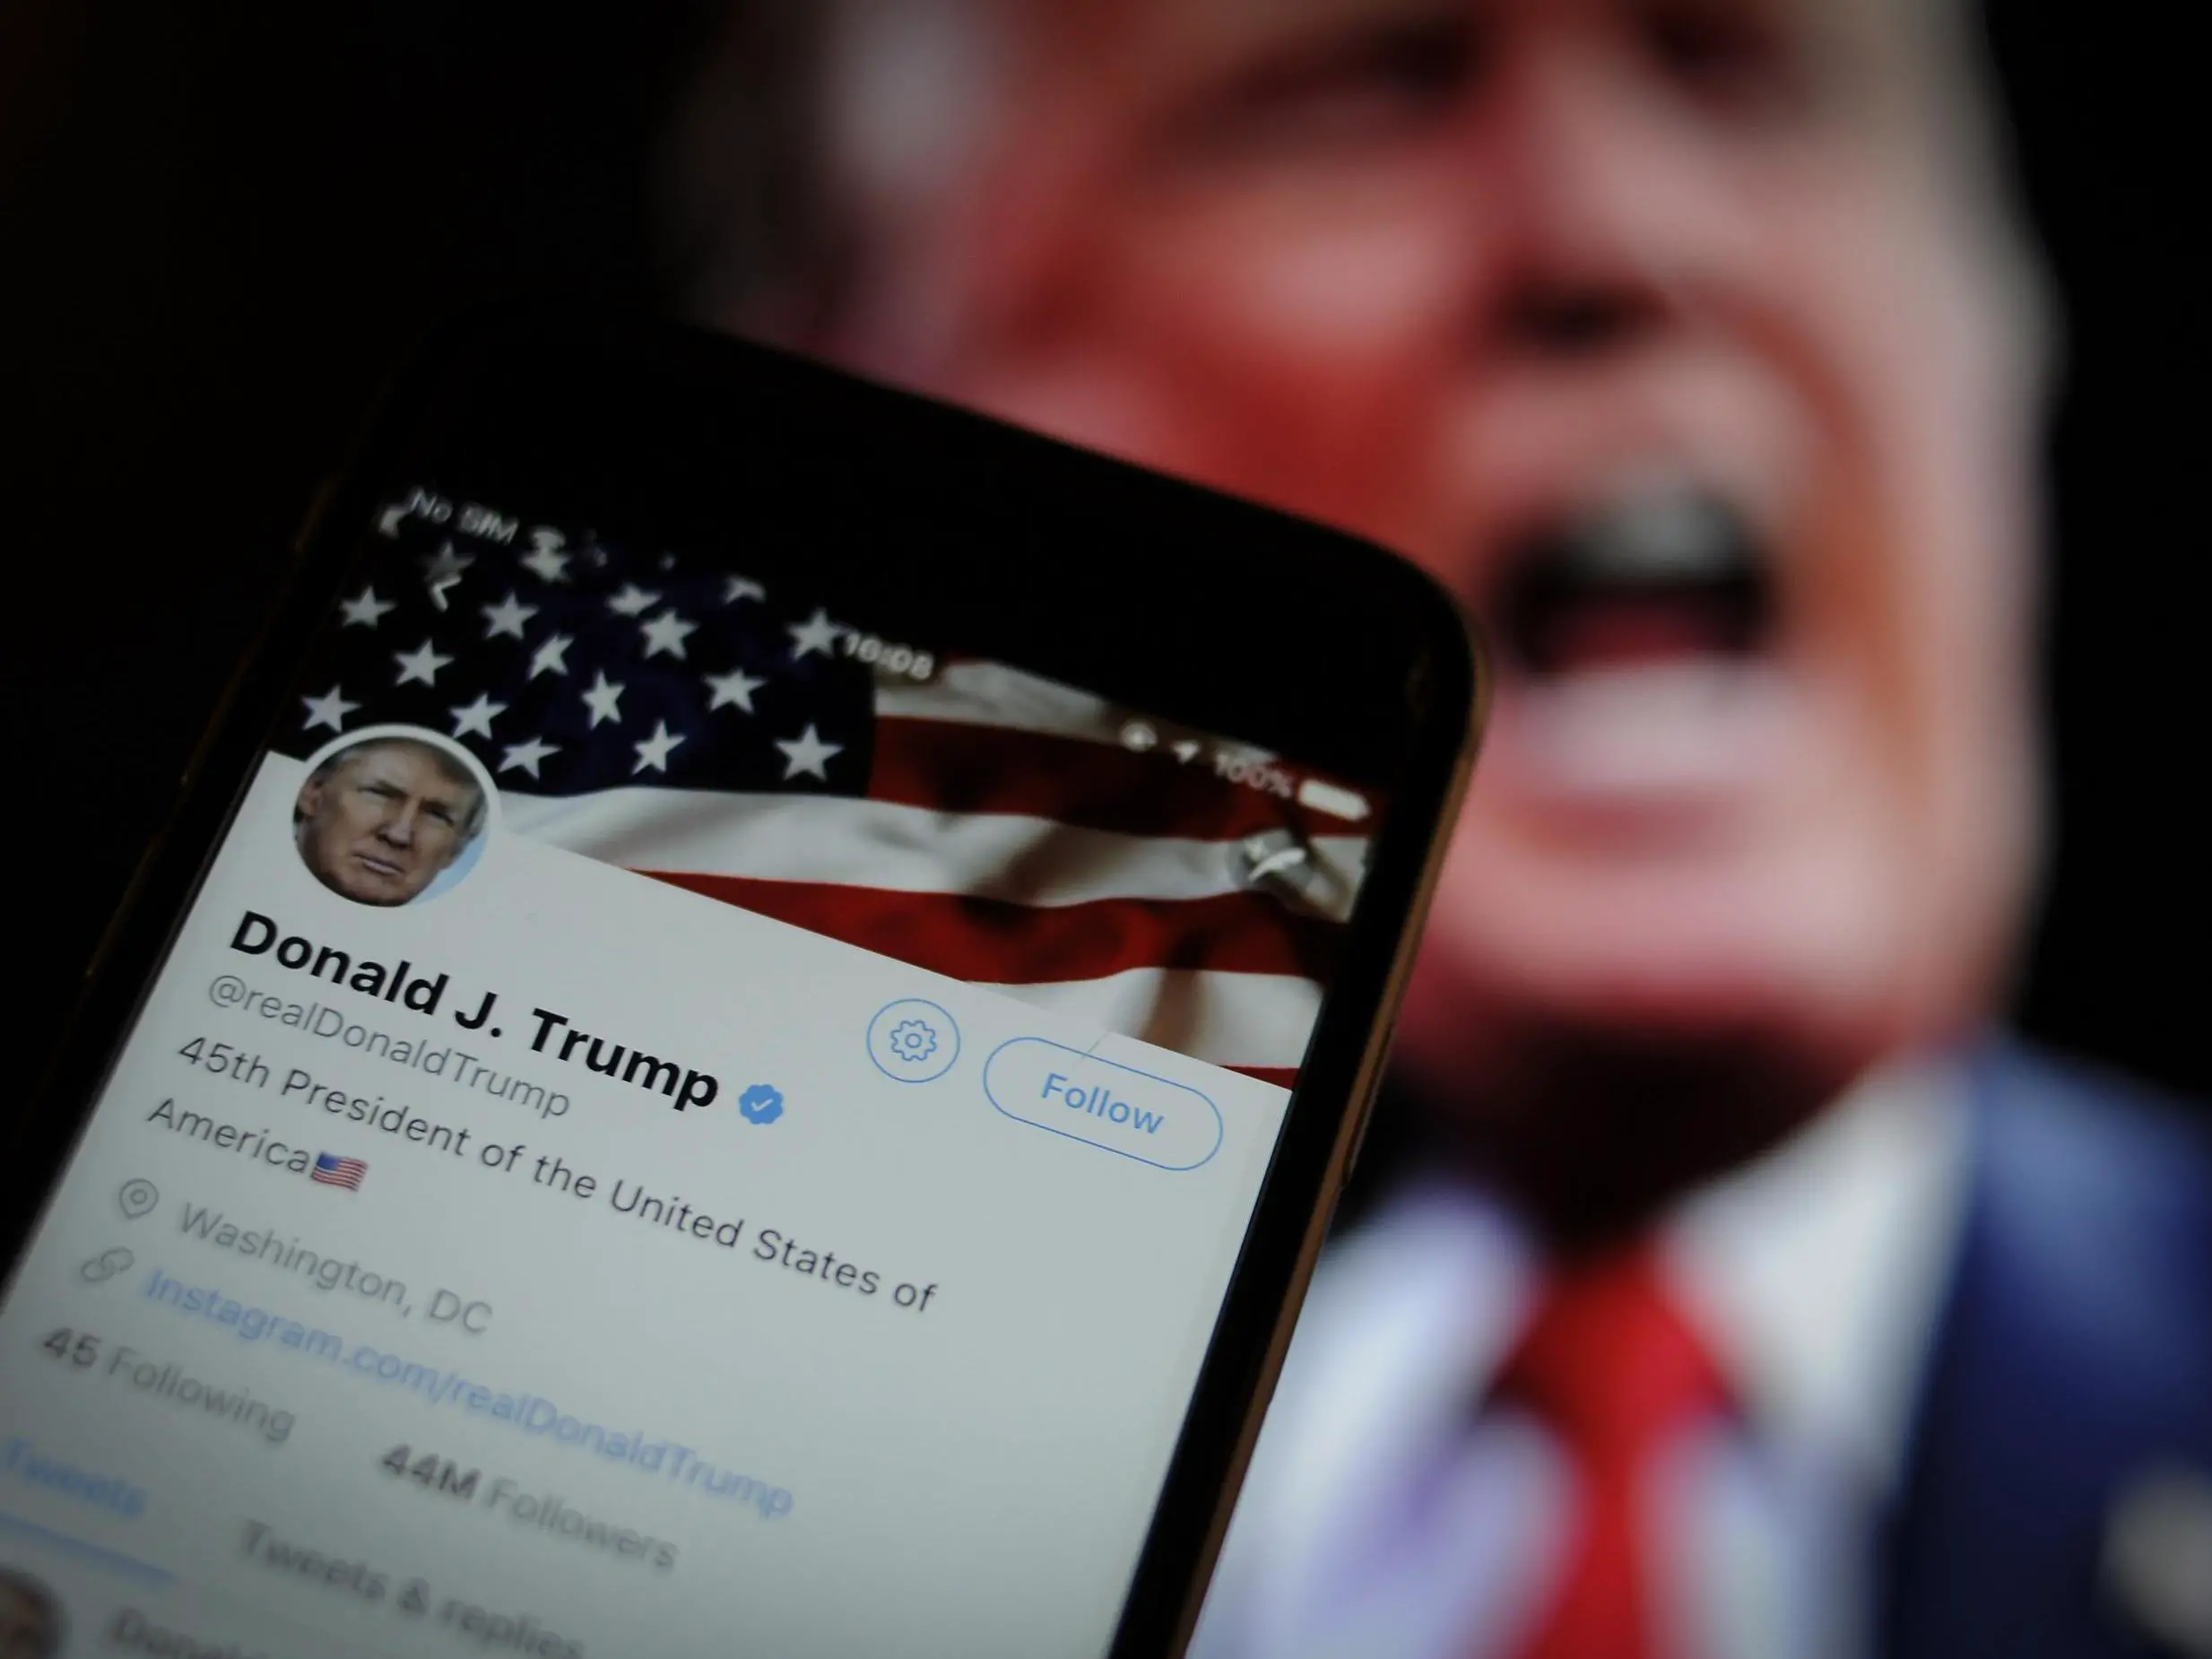 What has Trump tweeted today? The latest Twitter posts ...